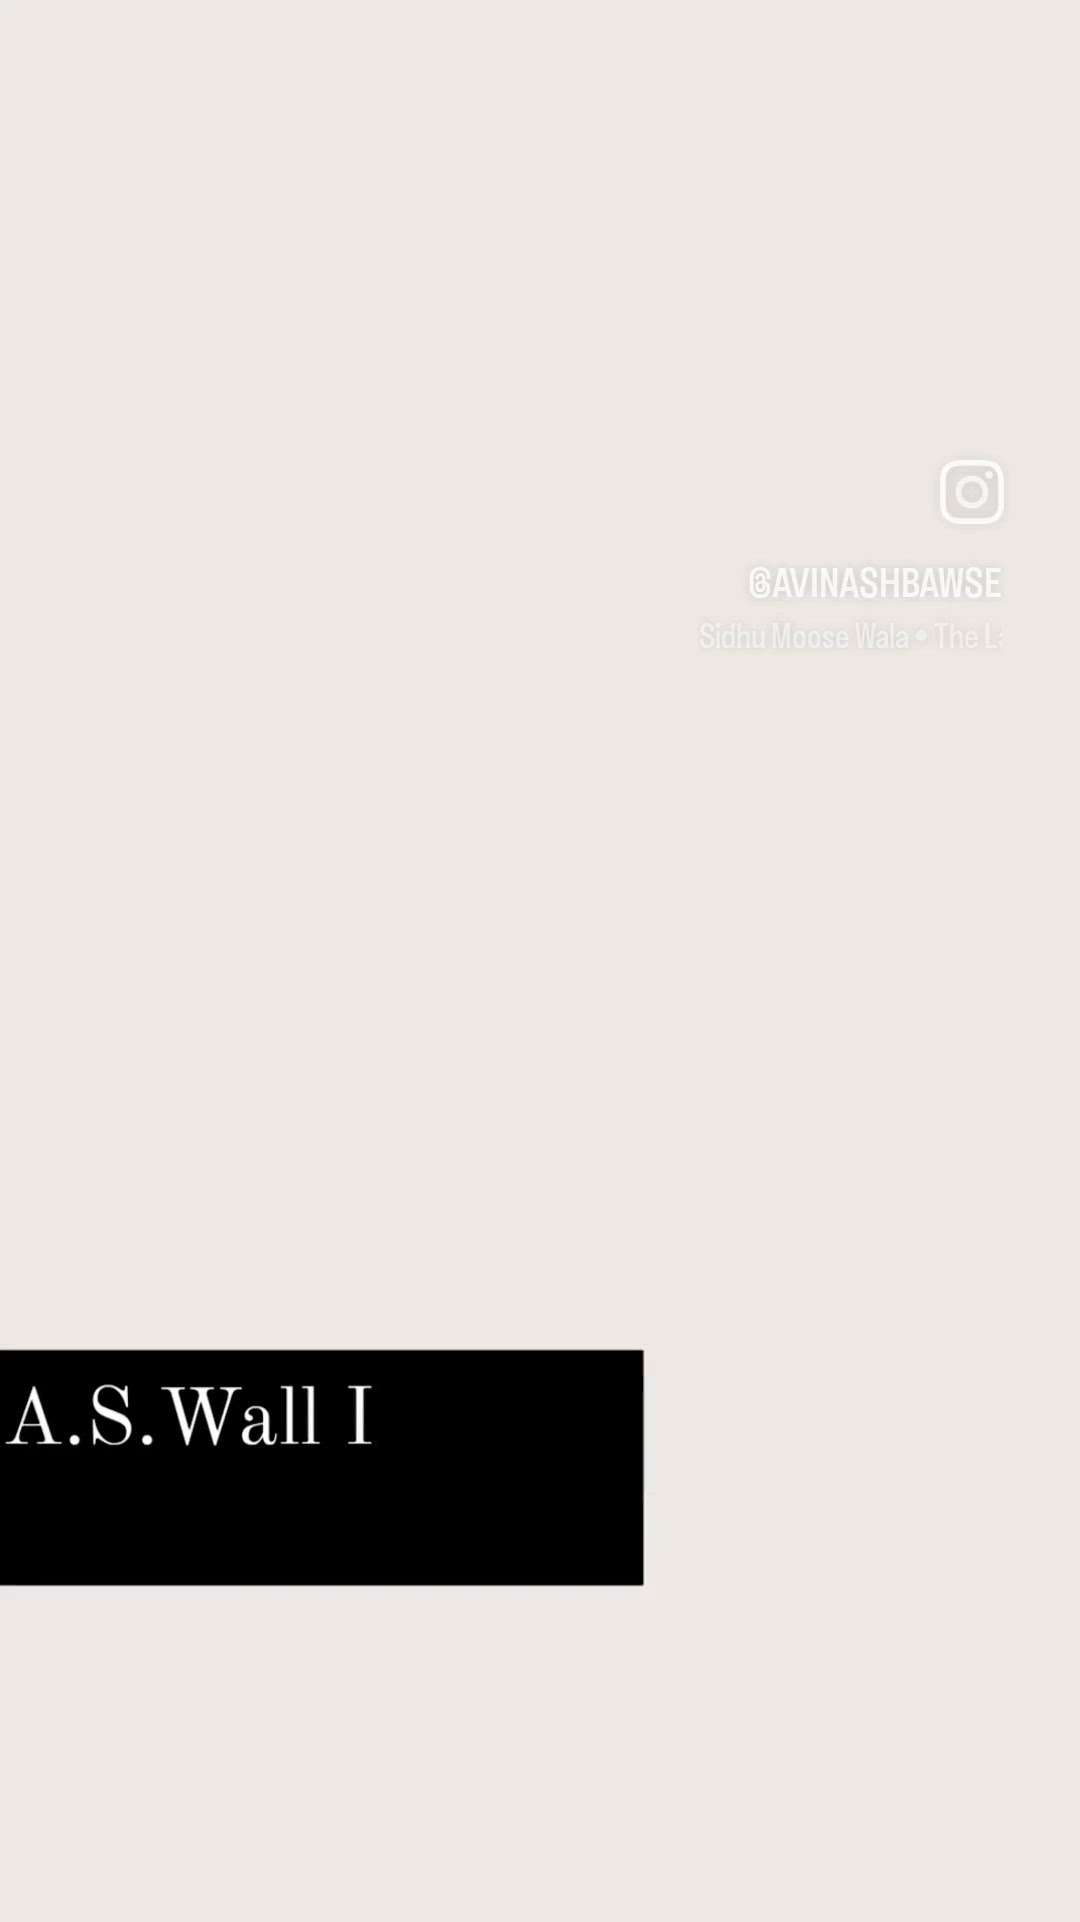 🏡A.S.Wall Interiors🏡
Customized wallpaper
Contact us
09074843469
09111695536